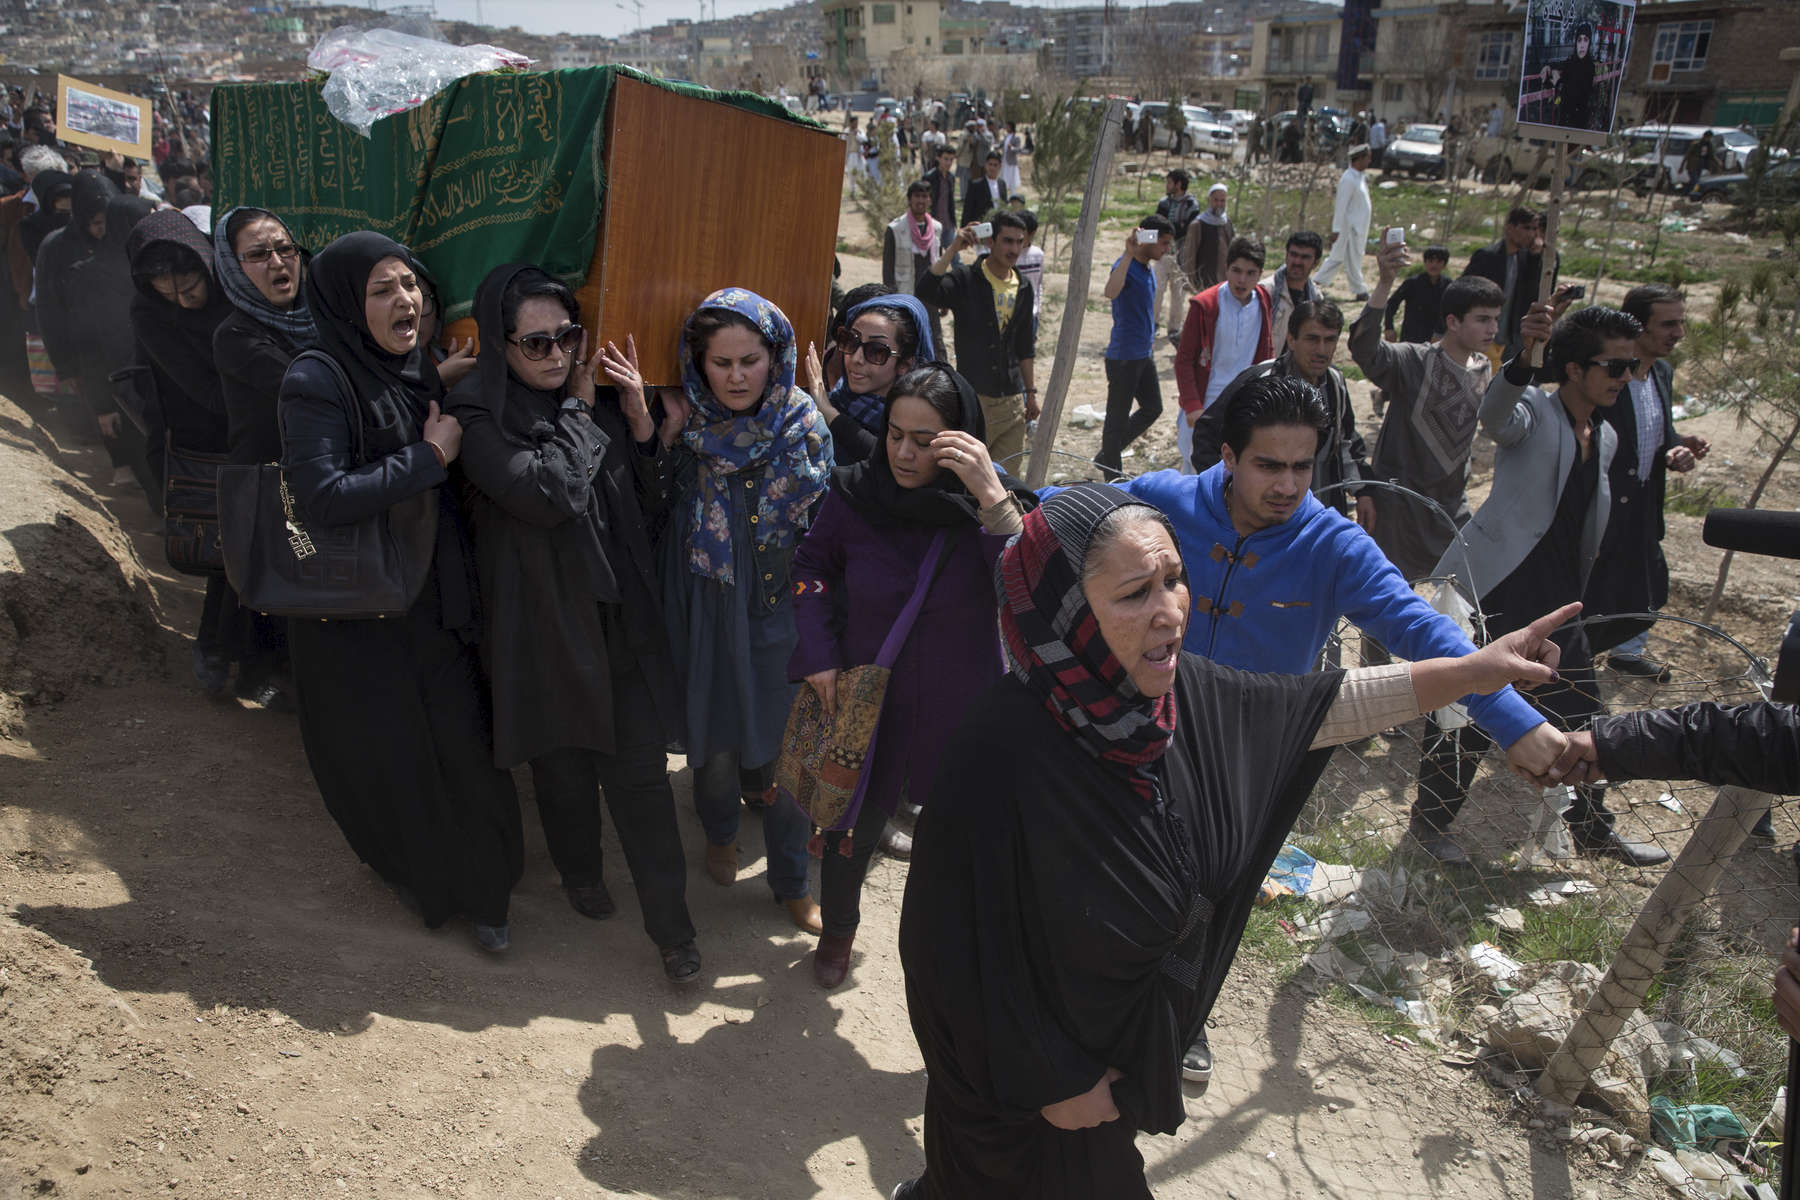 KABUL, AFGHANISTAN - MARCH 22, 2015:  Relatives friends and women\'s rights activists carry the casket of Farkhunda , 27, who was killed by a mob in the center of Kabul and was violently beaten and set on fire onThursday. She was attacked for allegedly burning a copy of the holy Quran which was false. Kabul police have detained nine people related to Farkhnuda’s case. President Ashraf Ghani has appointed a delegation to probe the incident. The Imam of Wazir Akbar Khan Mosque was denied permission to take part at Farkhunda’s funeral following his remarks on her death.(Photo by Paula Bronstein/ for the Wall Street Journal)